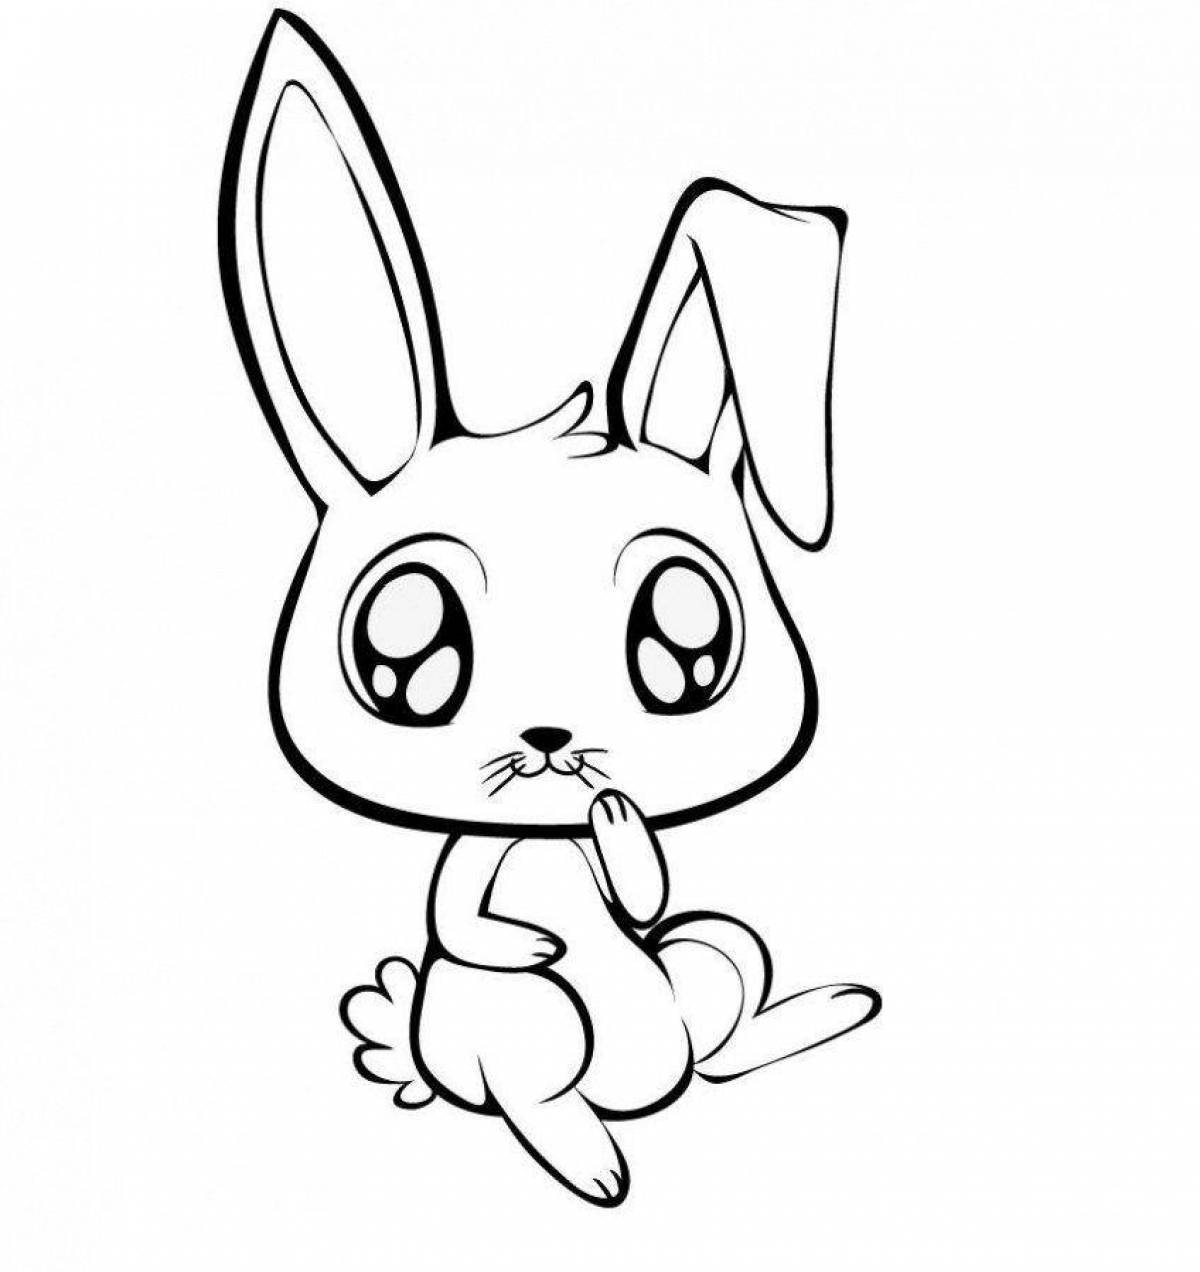 Cute and cute bunny coloring book